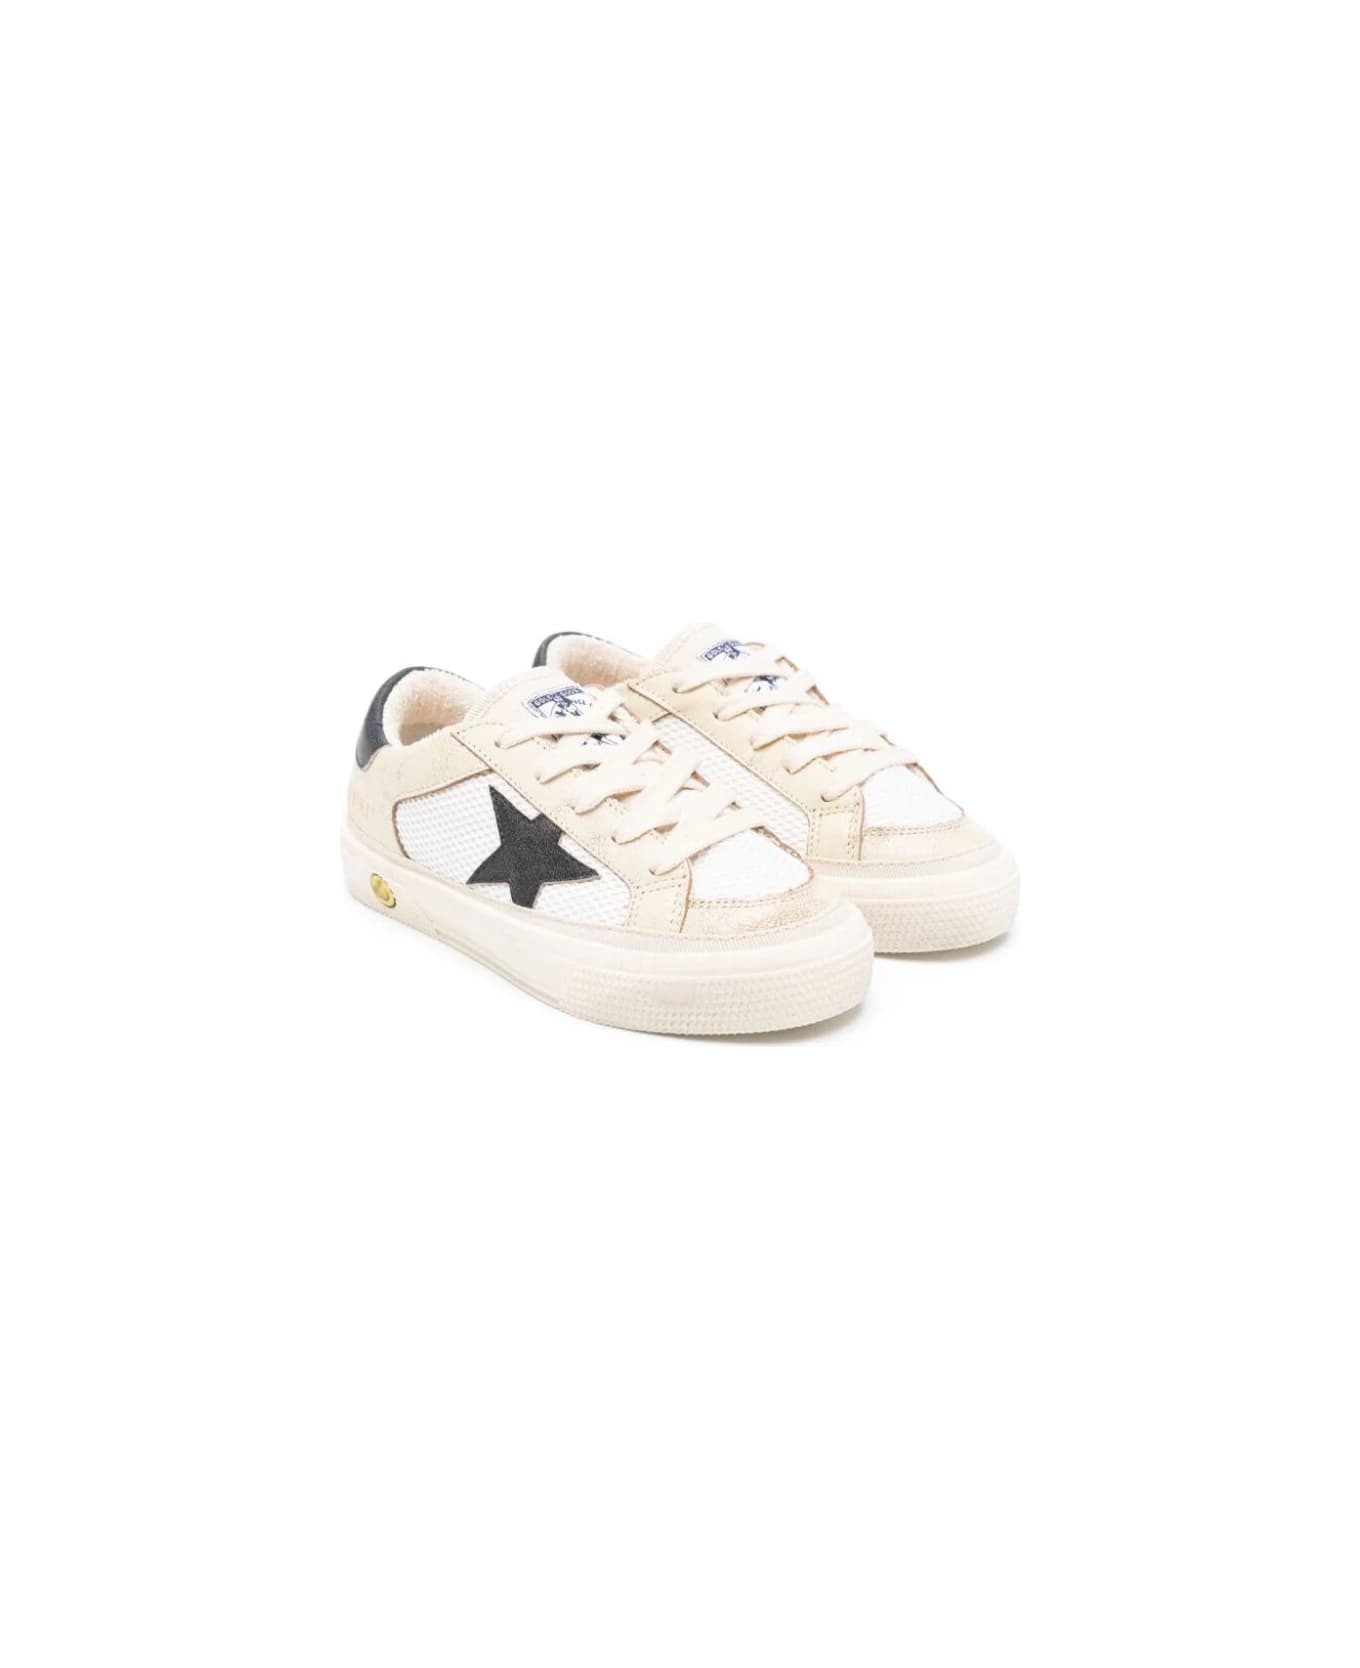 Golden Goose May Nappa Net And Leather Upper Nylon Tongue Leather Toe Star And Heel - White Blue シューズ